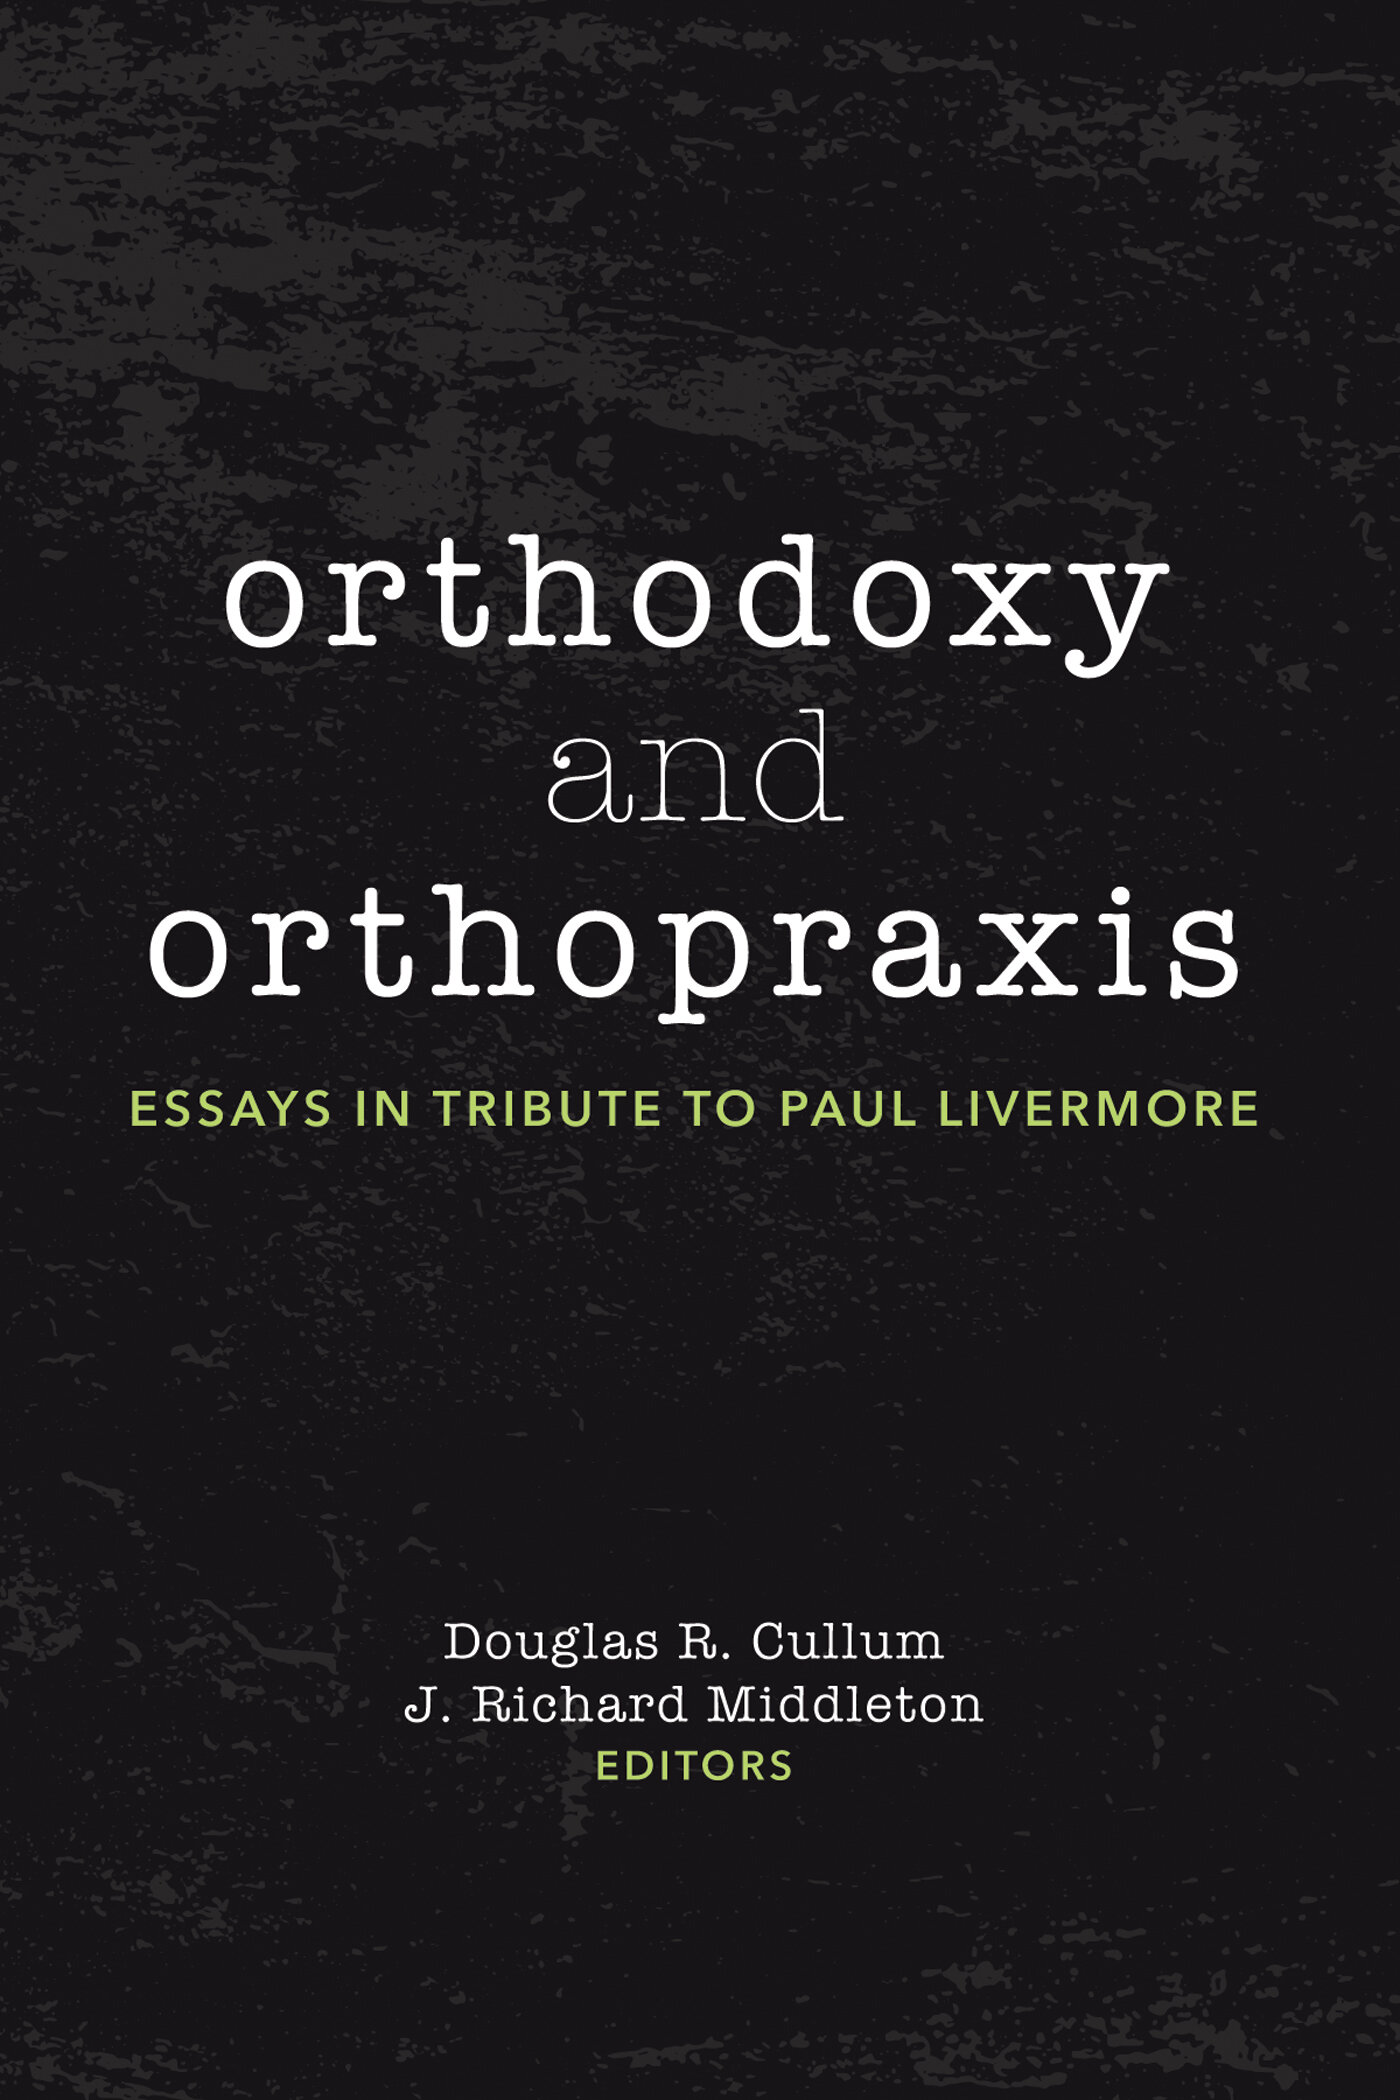 Orthodoxy and Orthopraxis: Essays in Tribute to Paul Livermore | Logos ...